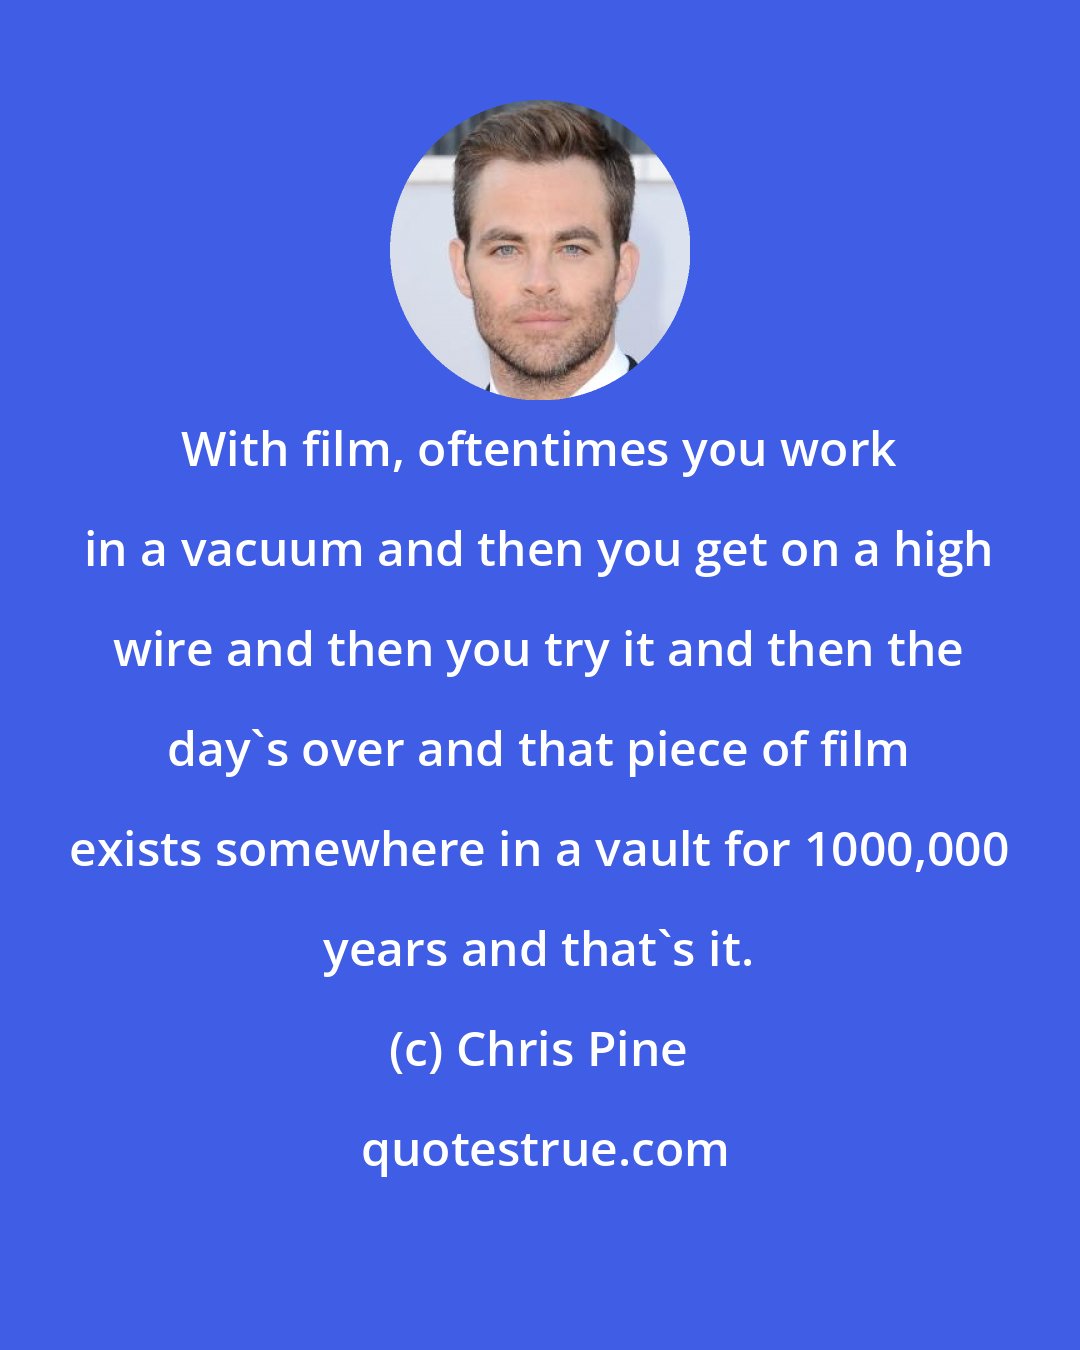 Chris Pine: With film, oftentimes you work in a vacuum and then you get on a high wire and then you try it and then the day's over and that piece of film exists somewhere in a vault for 1000,000 years and that's it.